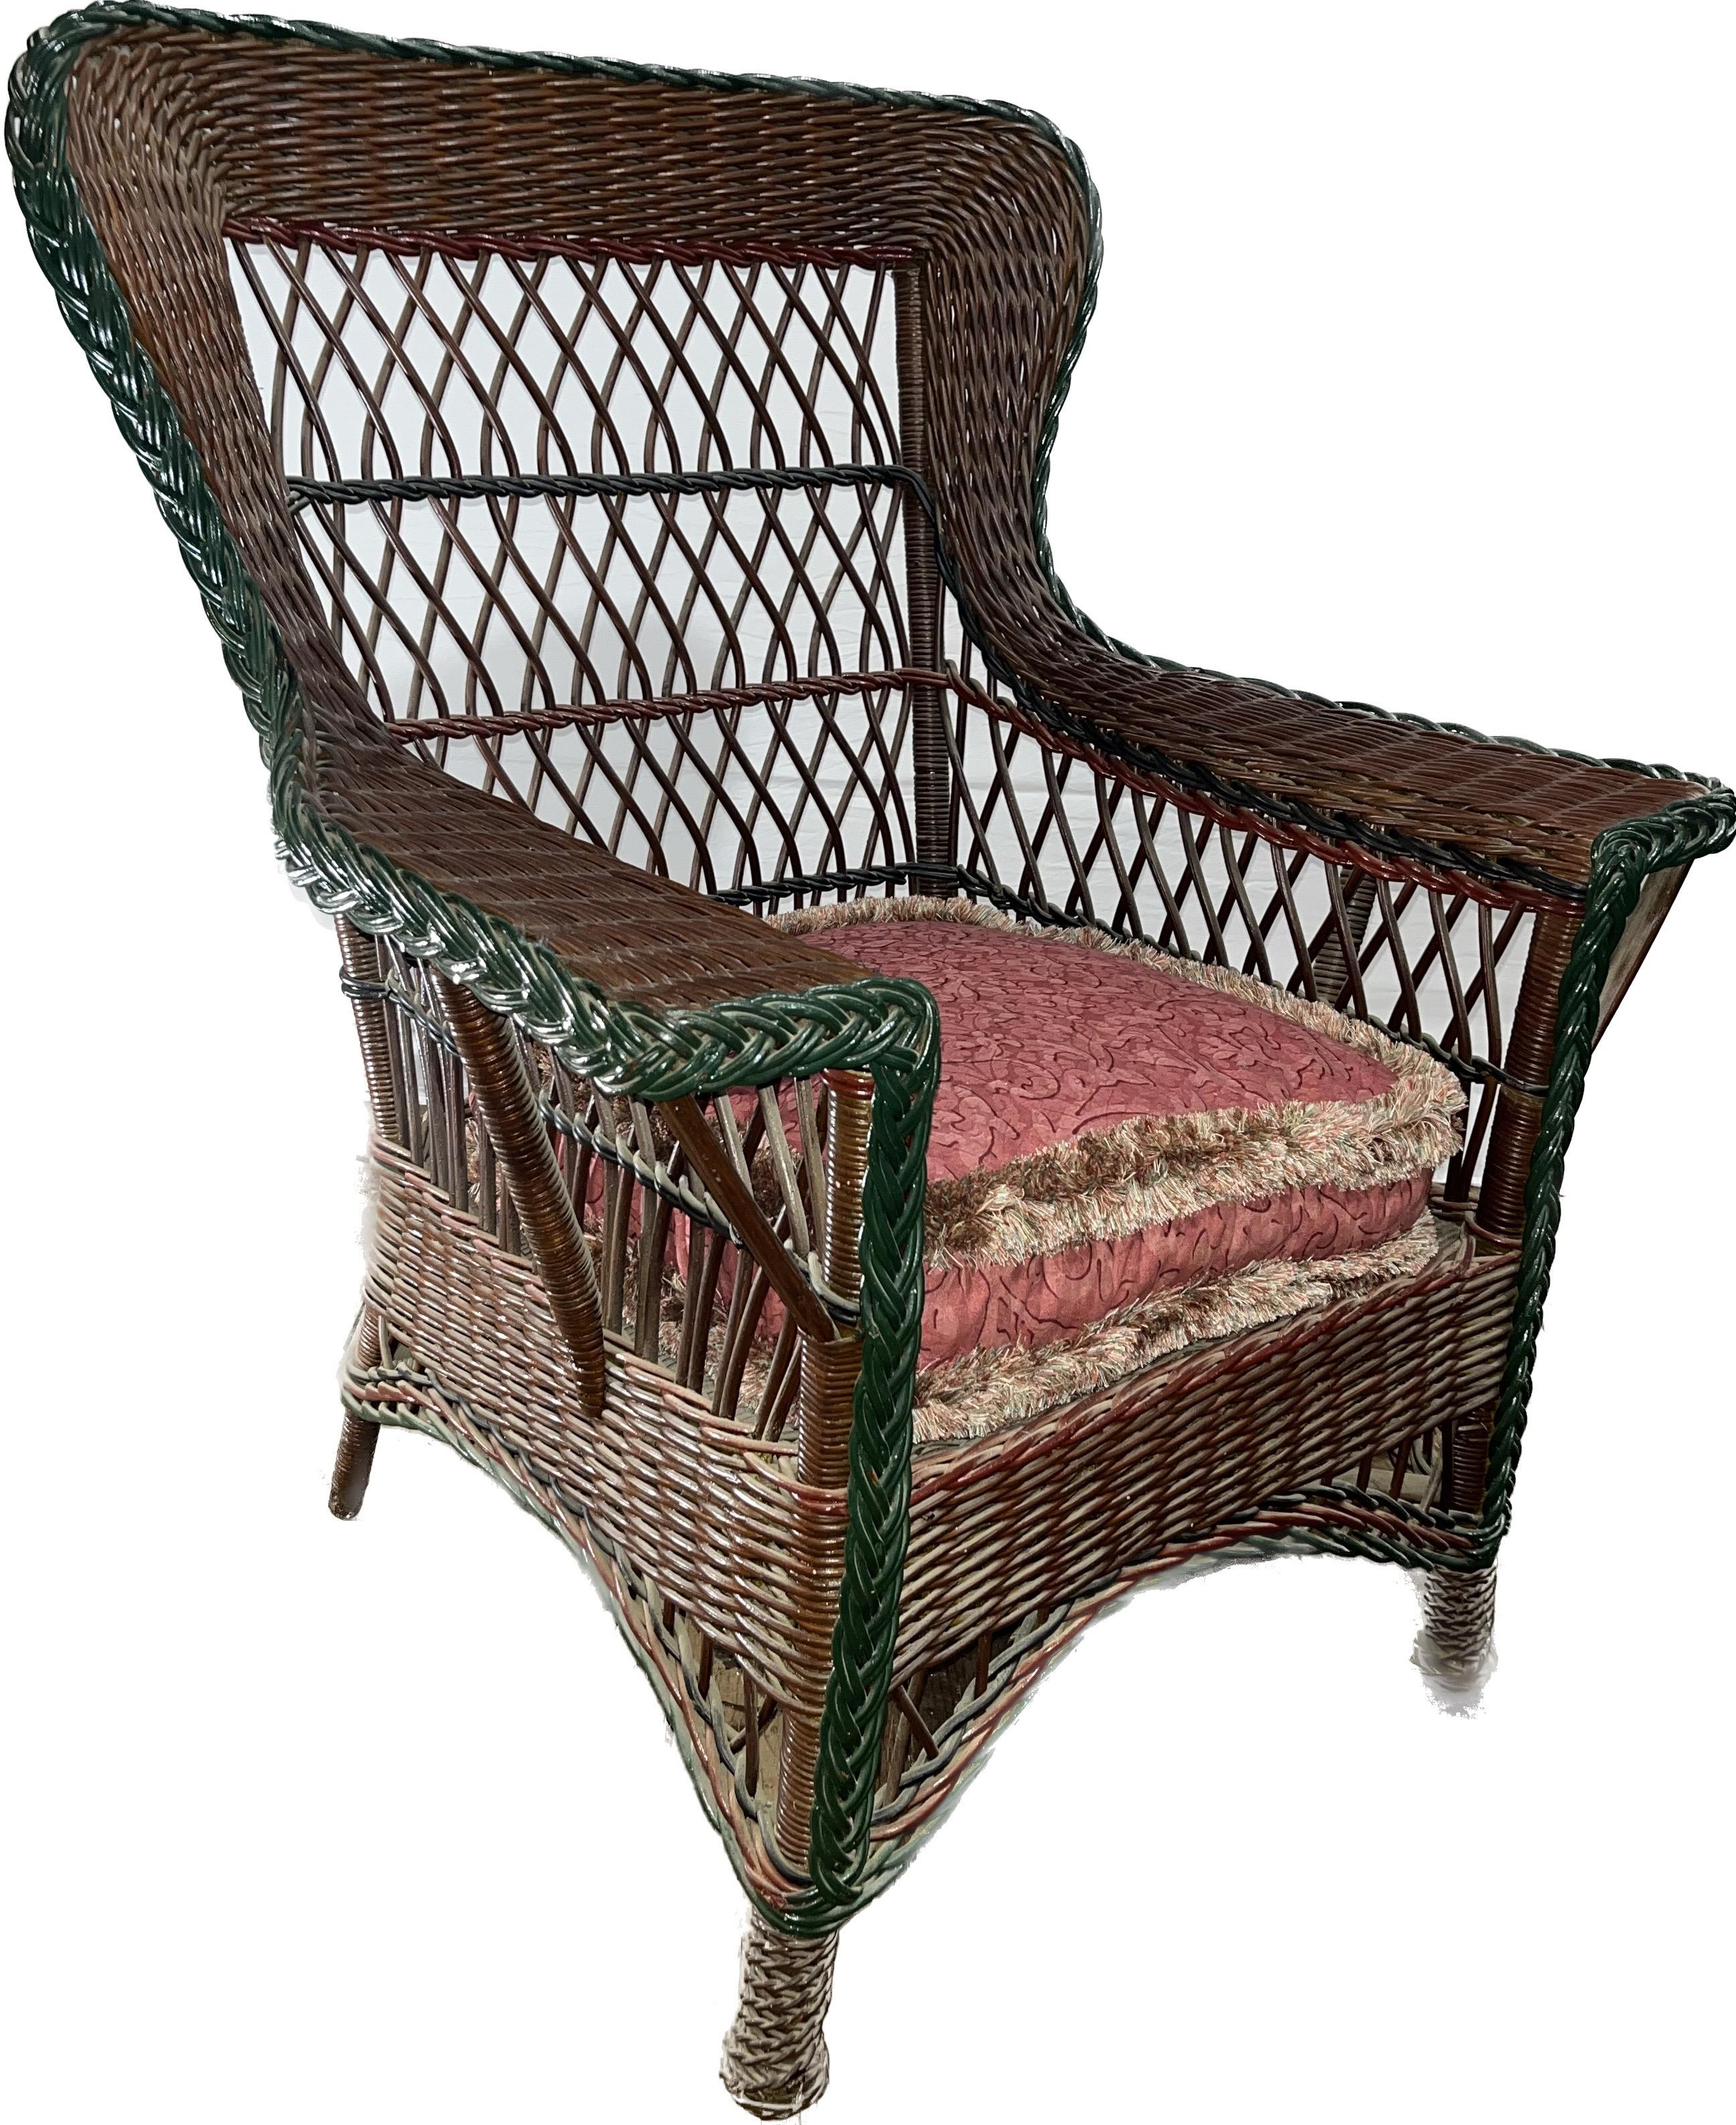 American Antique Bar Harbor Style Wicker Wing Chair in Natural Finish with Green Trim For Sale